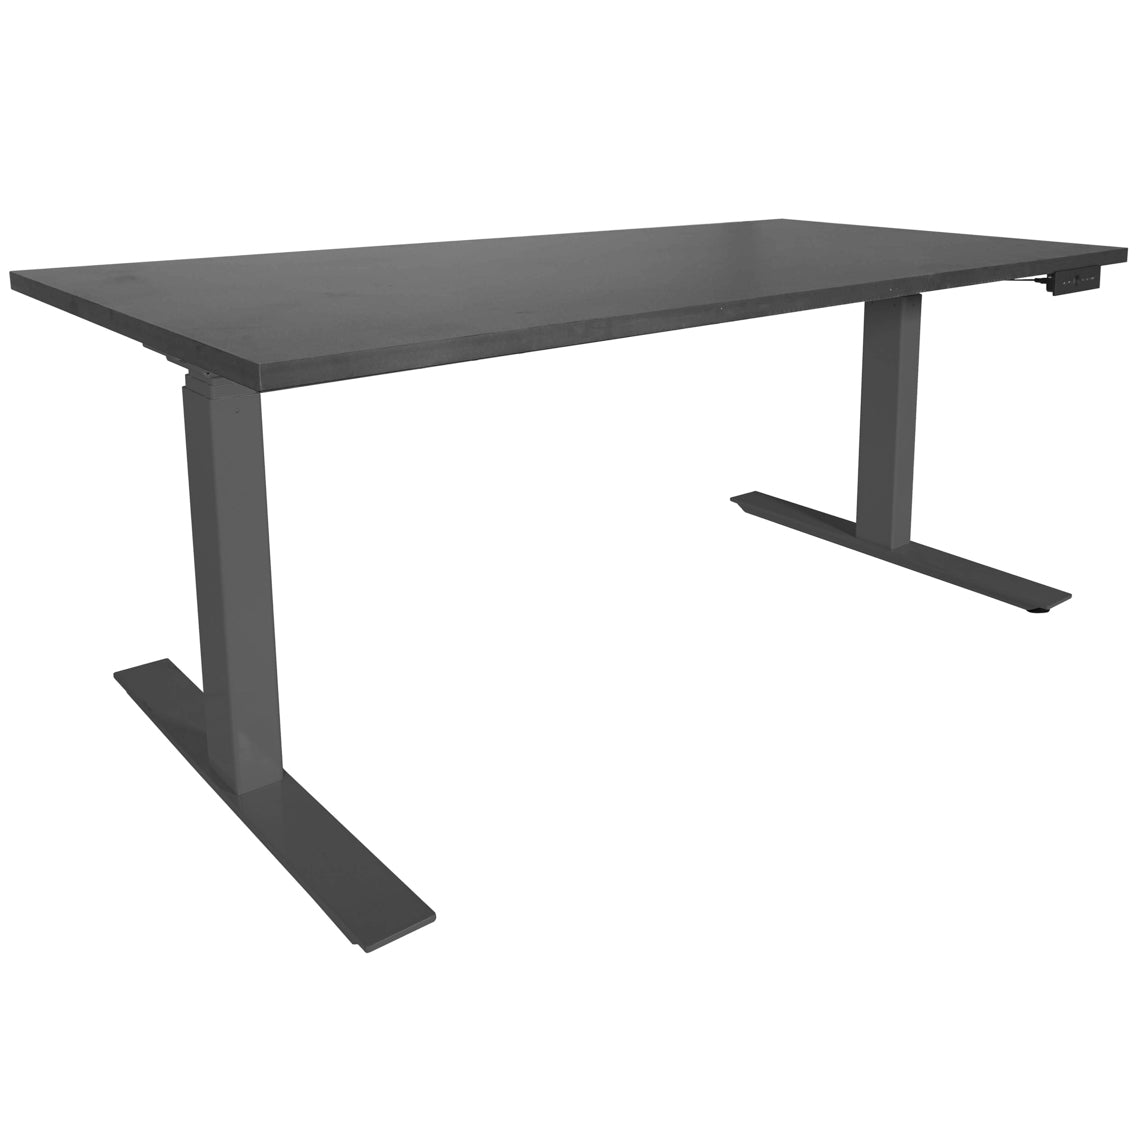 A6 Adjustable Sit To Stand Desk 24"- 50" W/ Black 60" X 30" Top - view 2